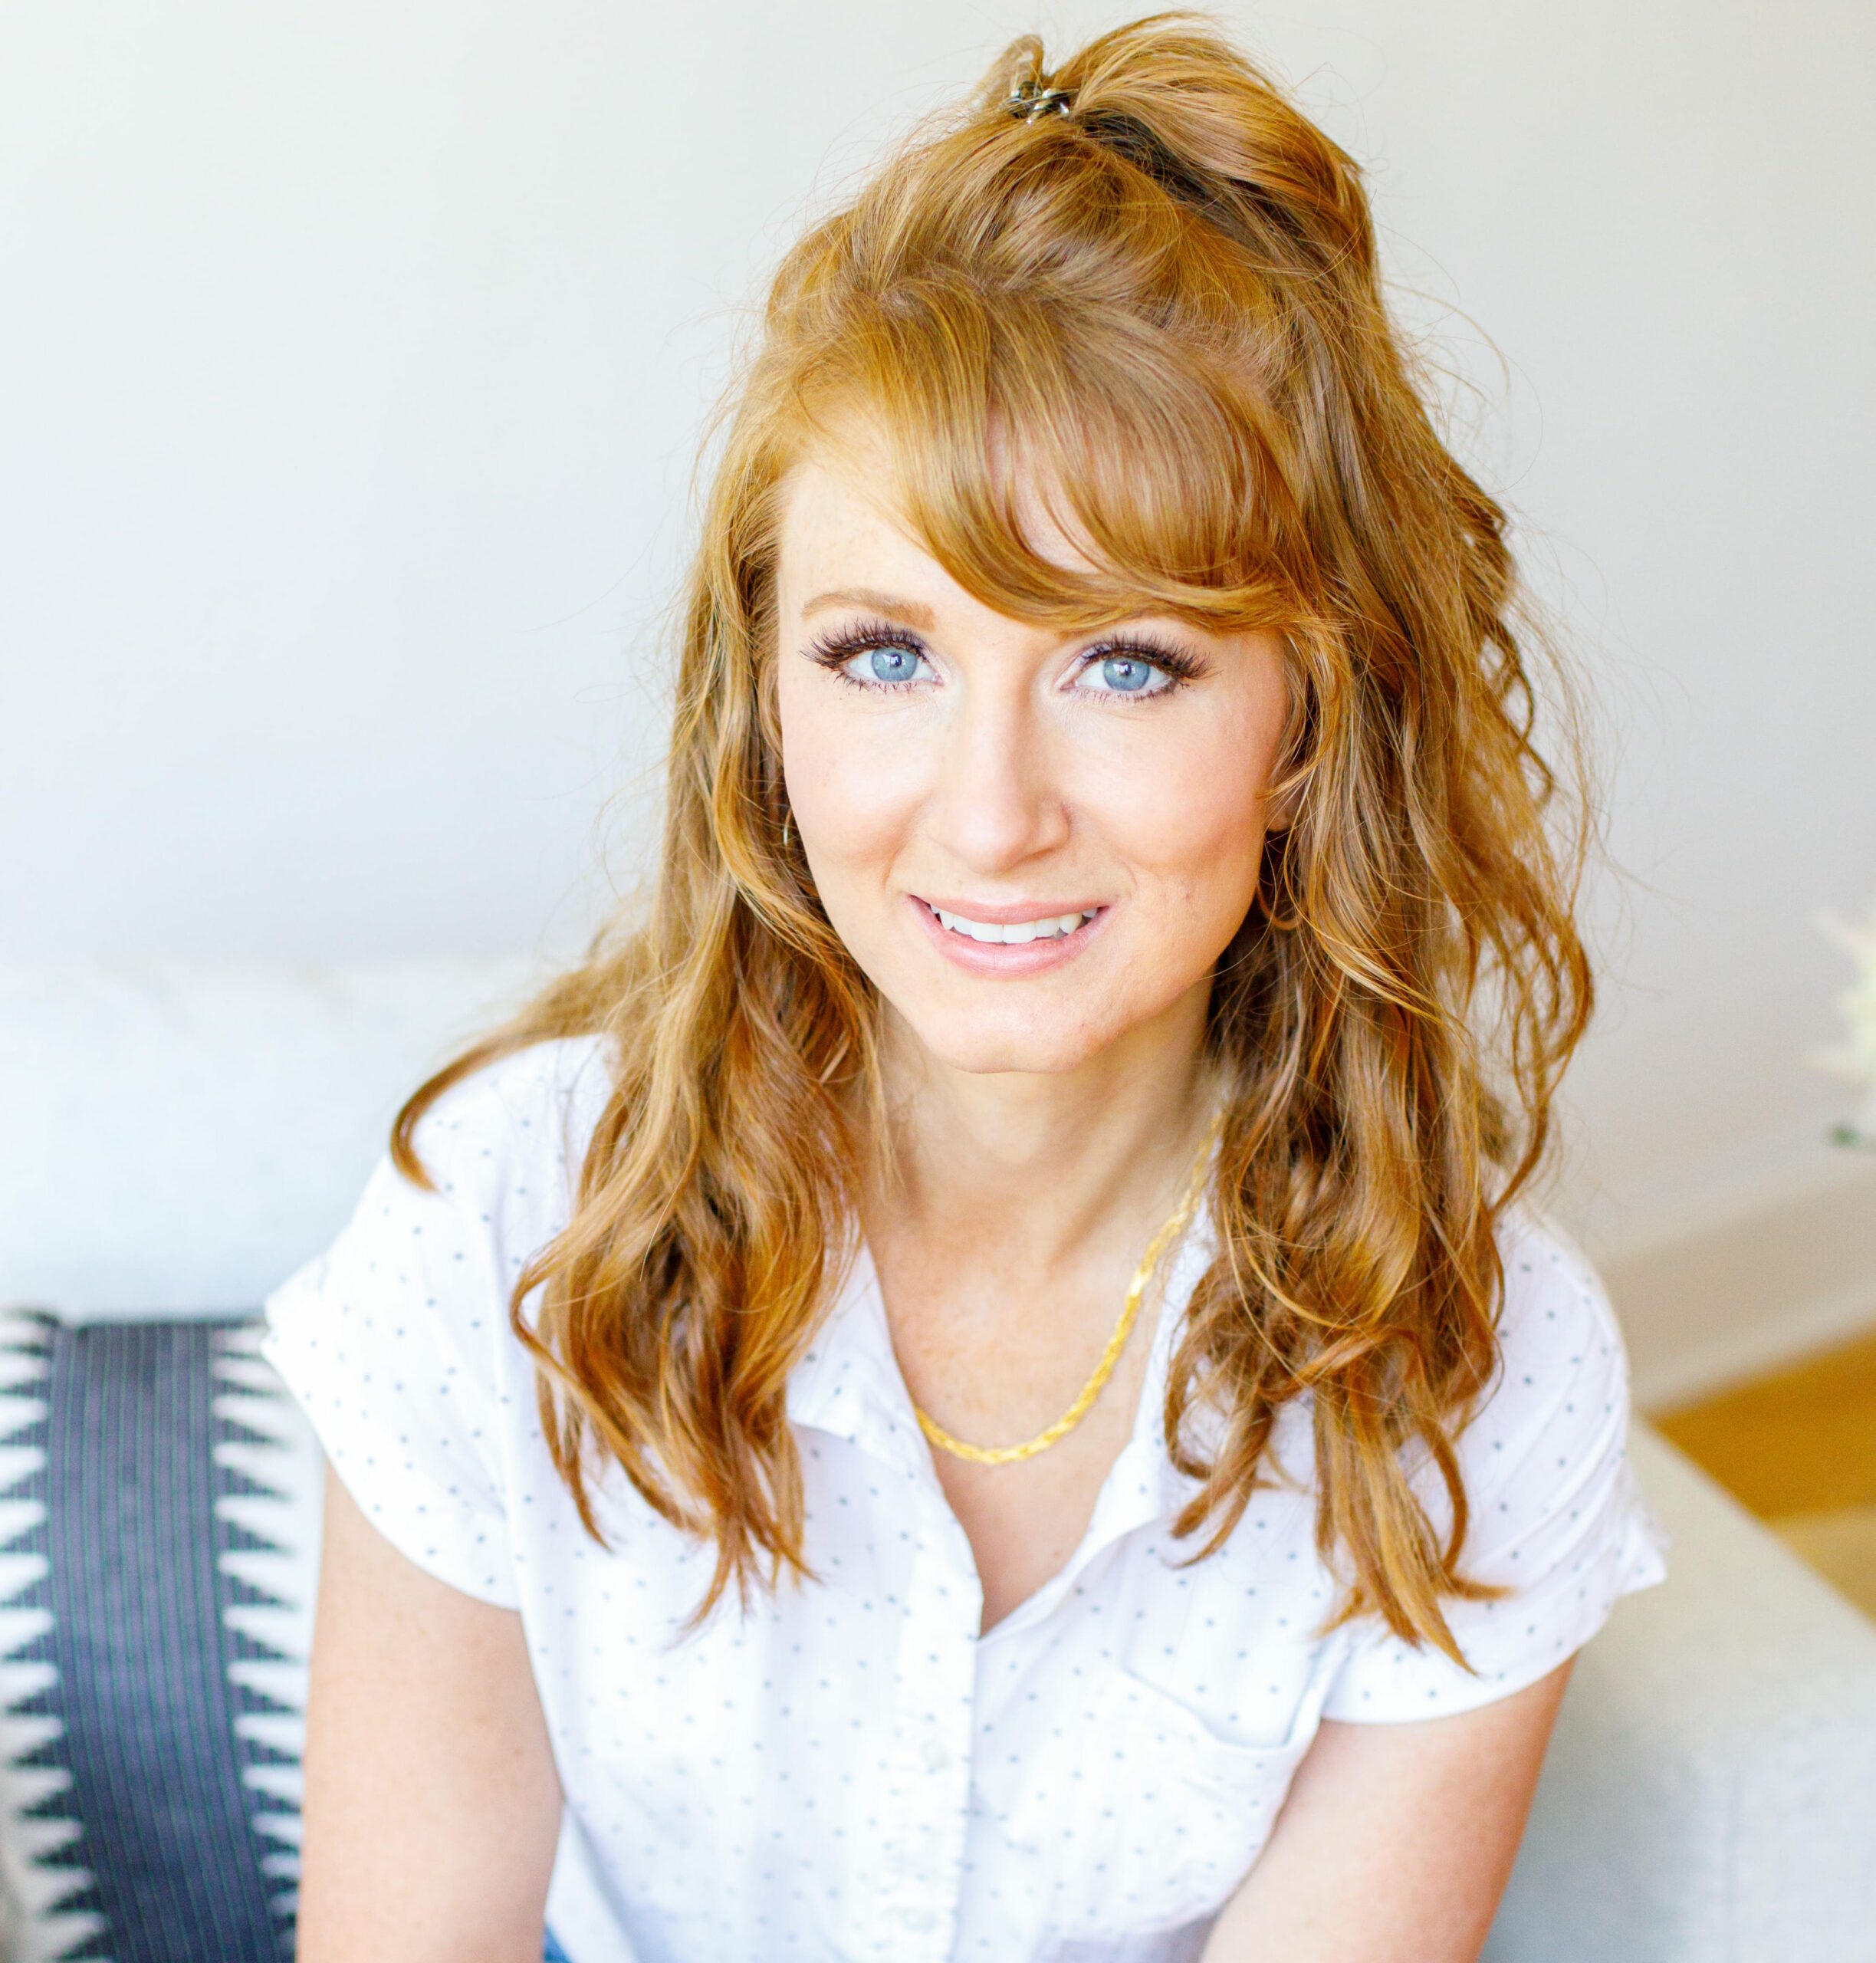 90: Kate the Socialite: How to Make Marketing Simple and Efficient